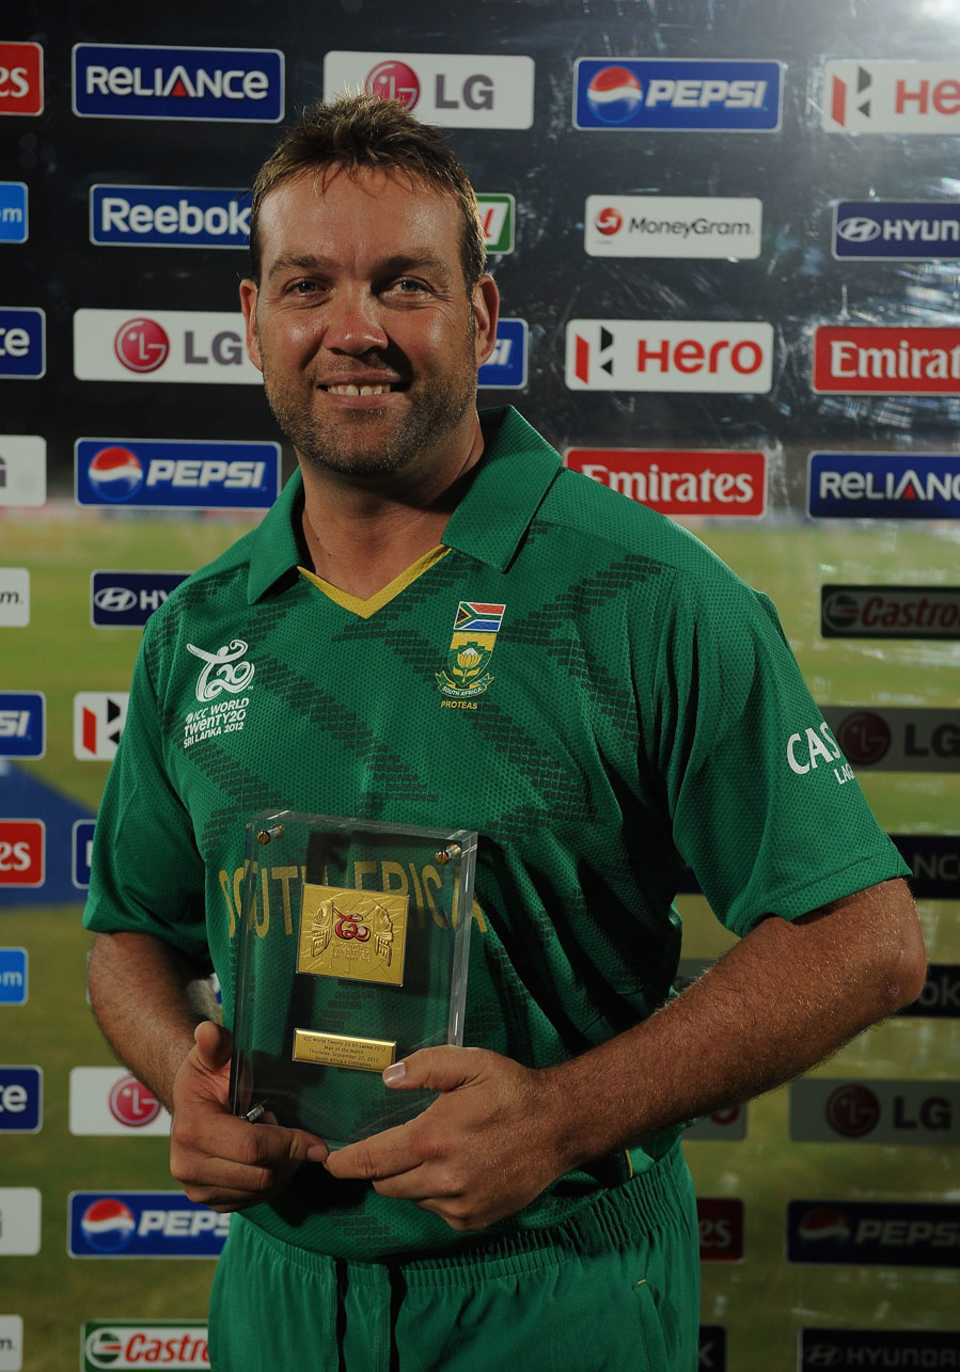 Jacques Kallis was named Man of the Match for his 4 for 15